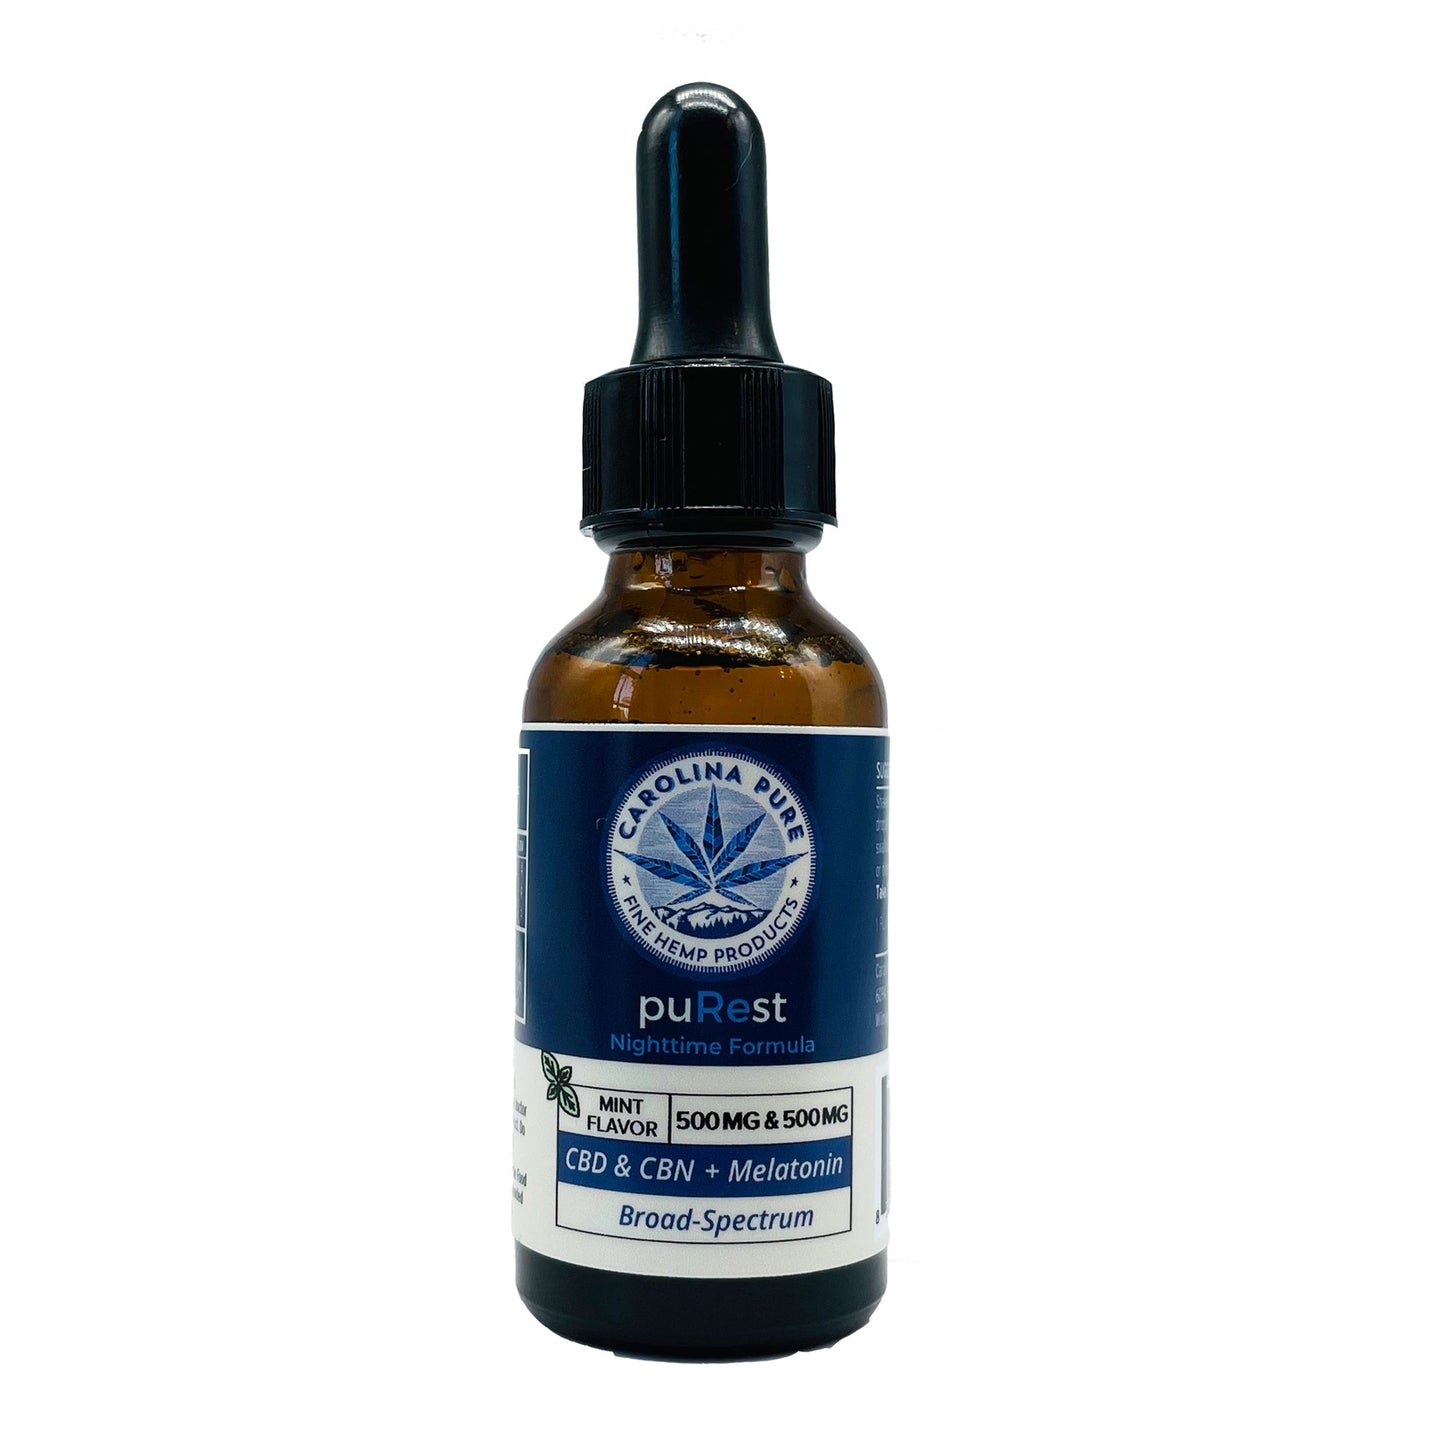 Carolina Pure CBD PuRest Tincture from Carolina Pure at Elevate Evolution- Grab yours today for $39.99! 